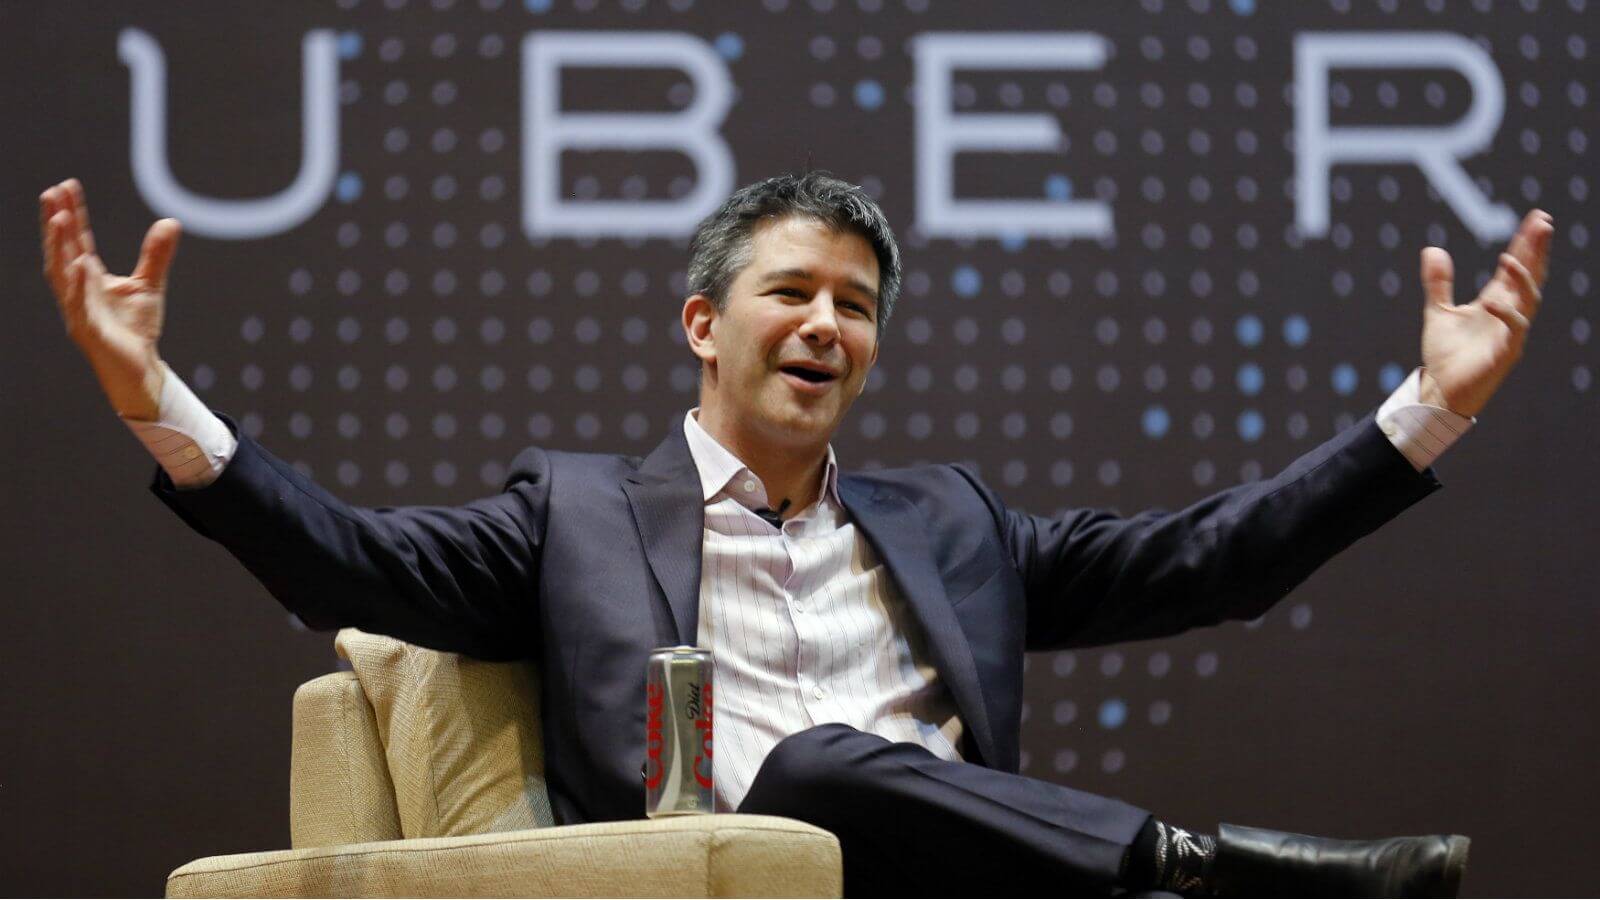 Uber CEO takes leave of absence amid shakeup